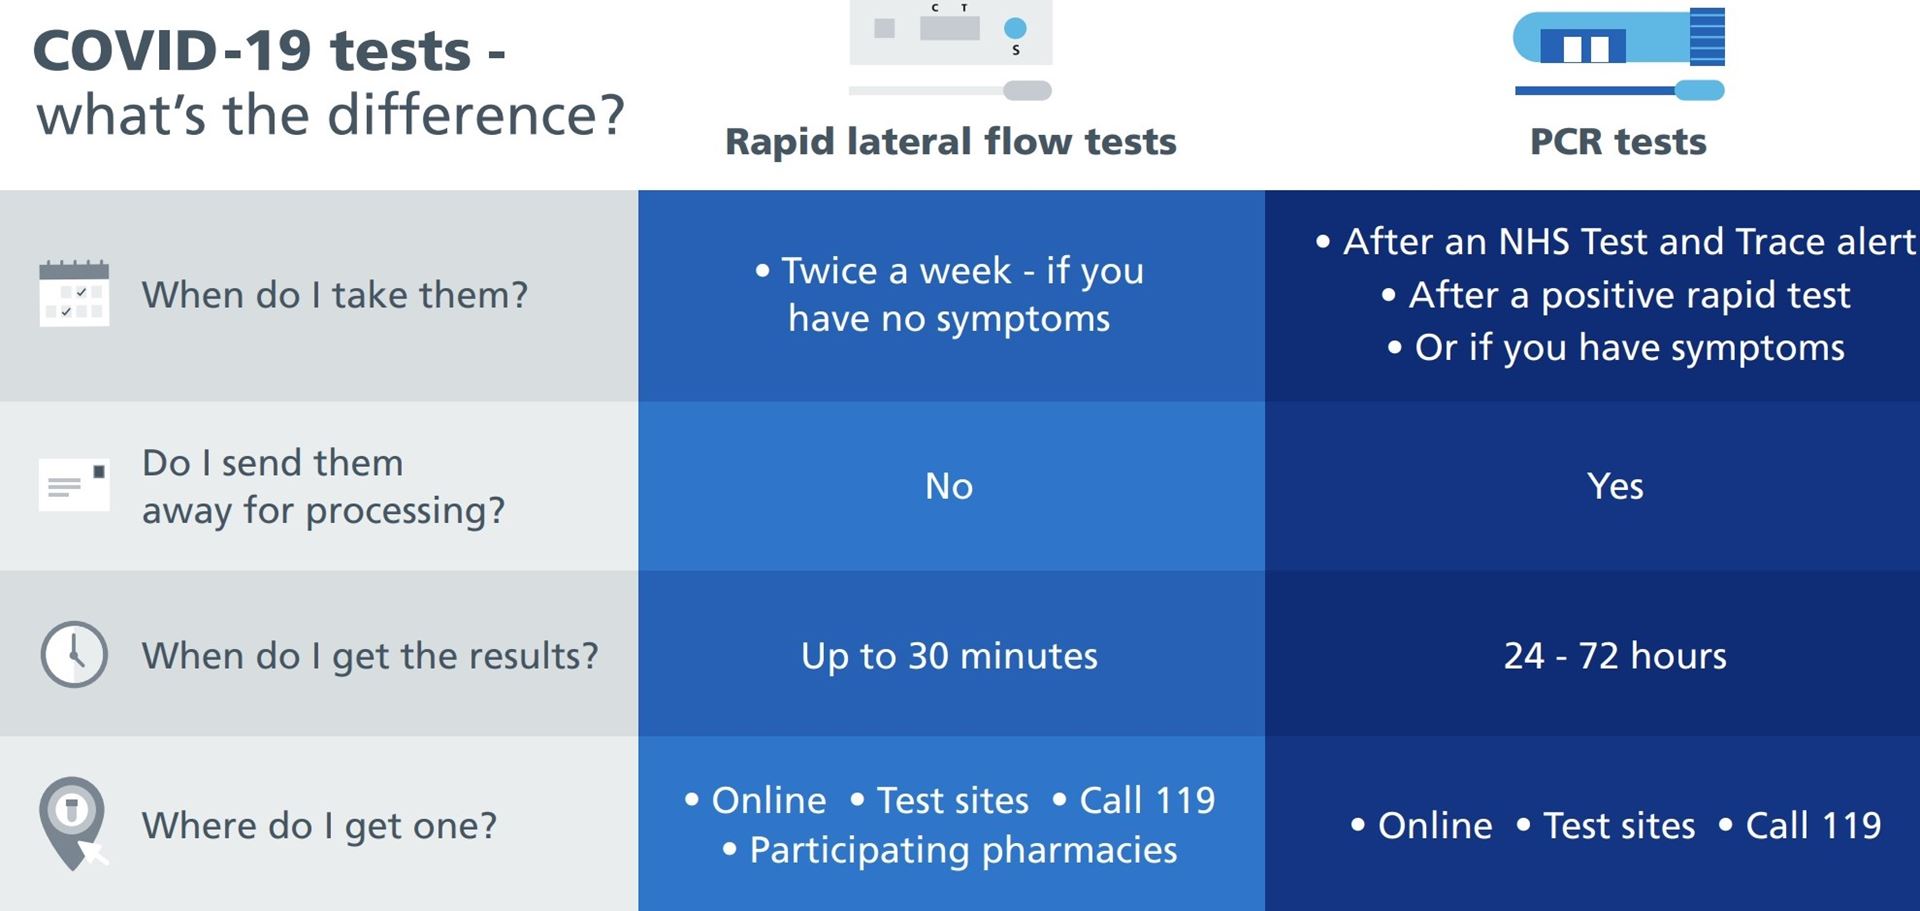 COVID-19 Test Differences Chart